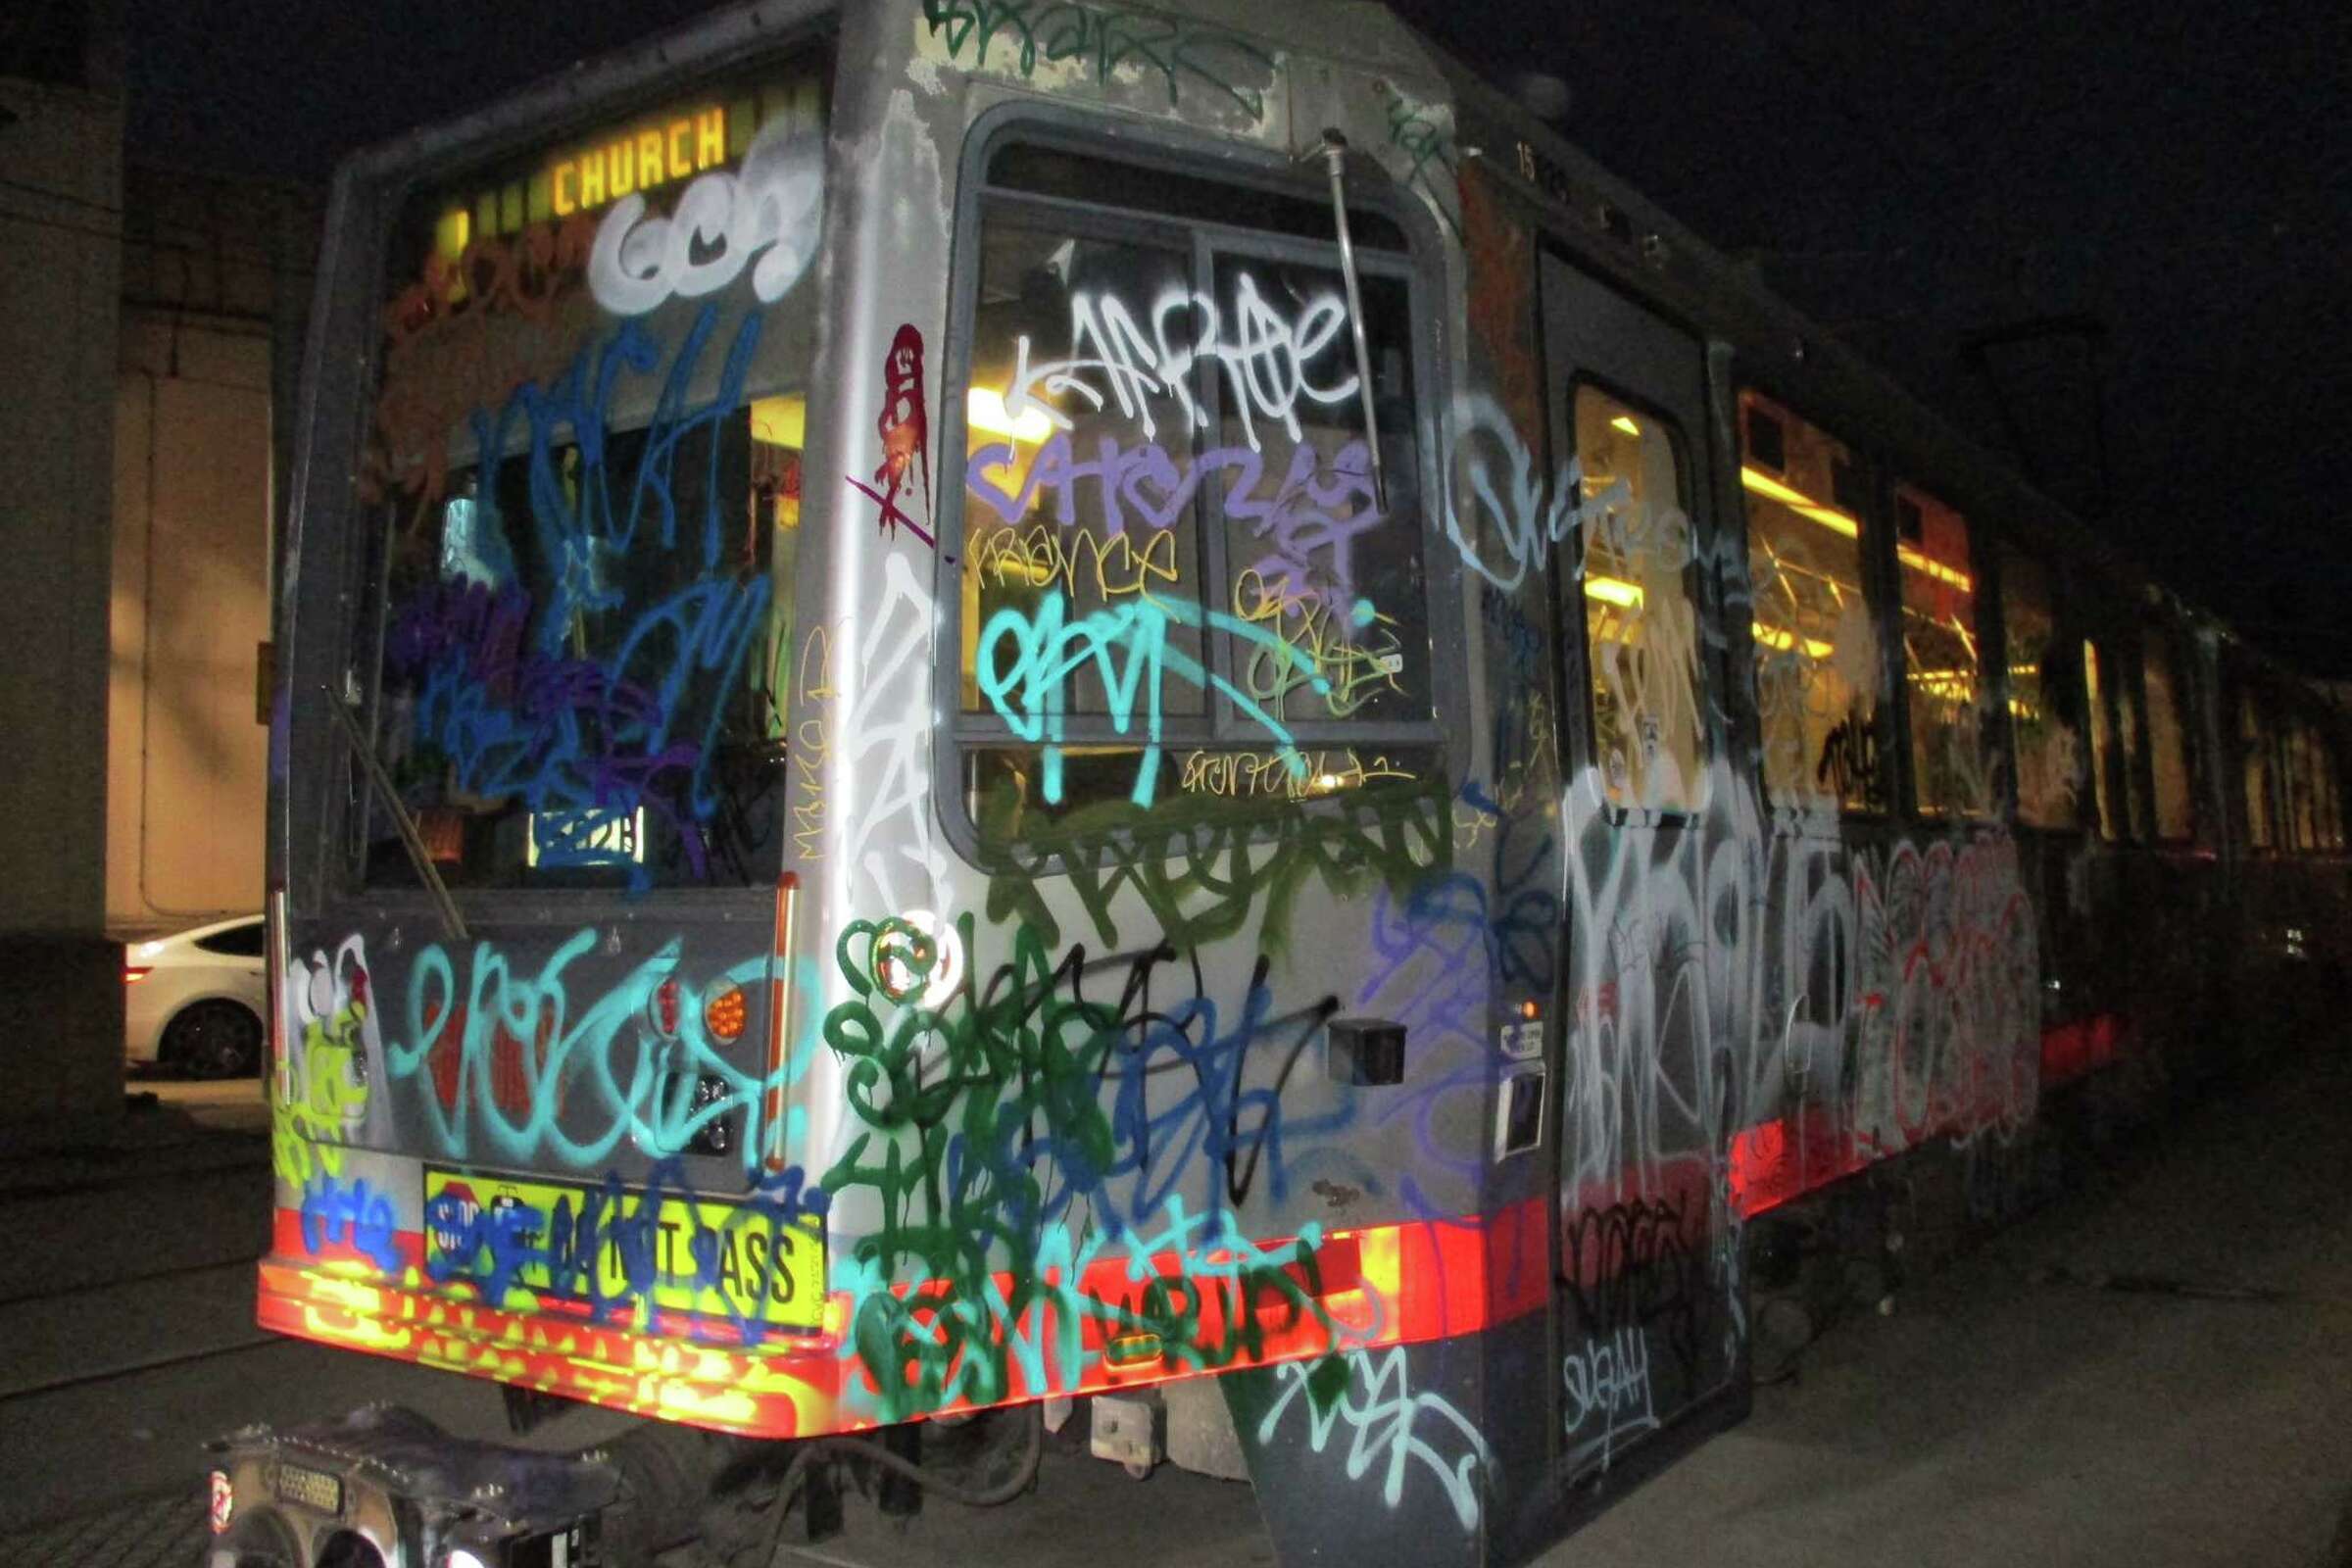 A graffiti-covered tram at night, with colorful tags and scribbles obscuring its windows and surface.